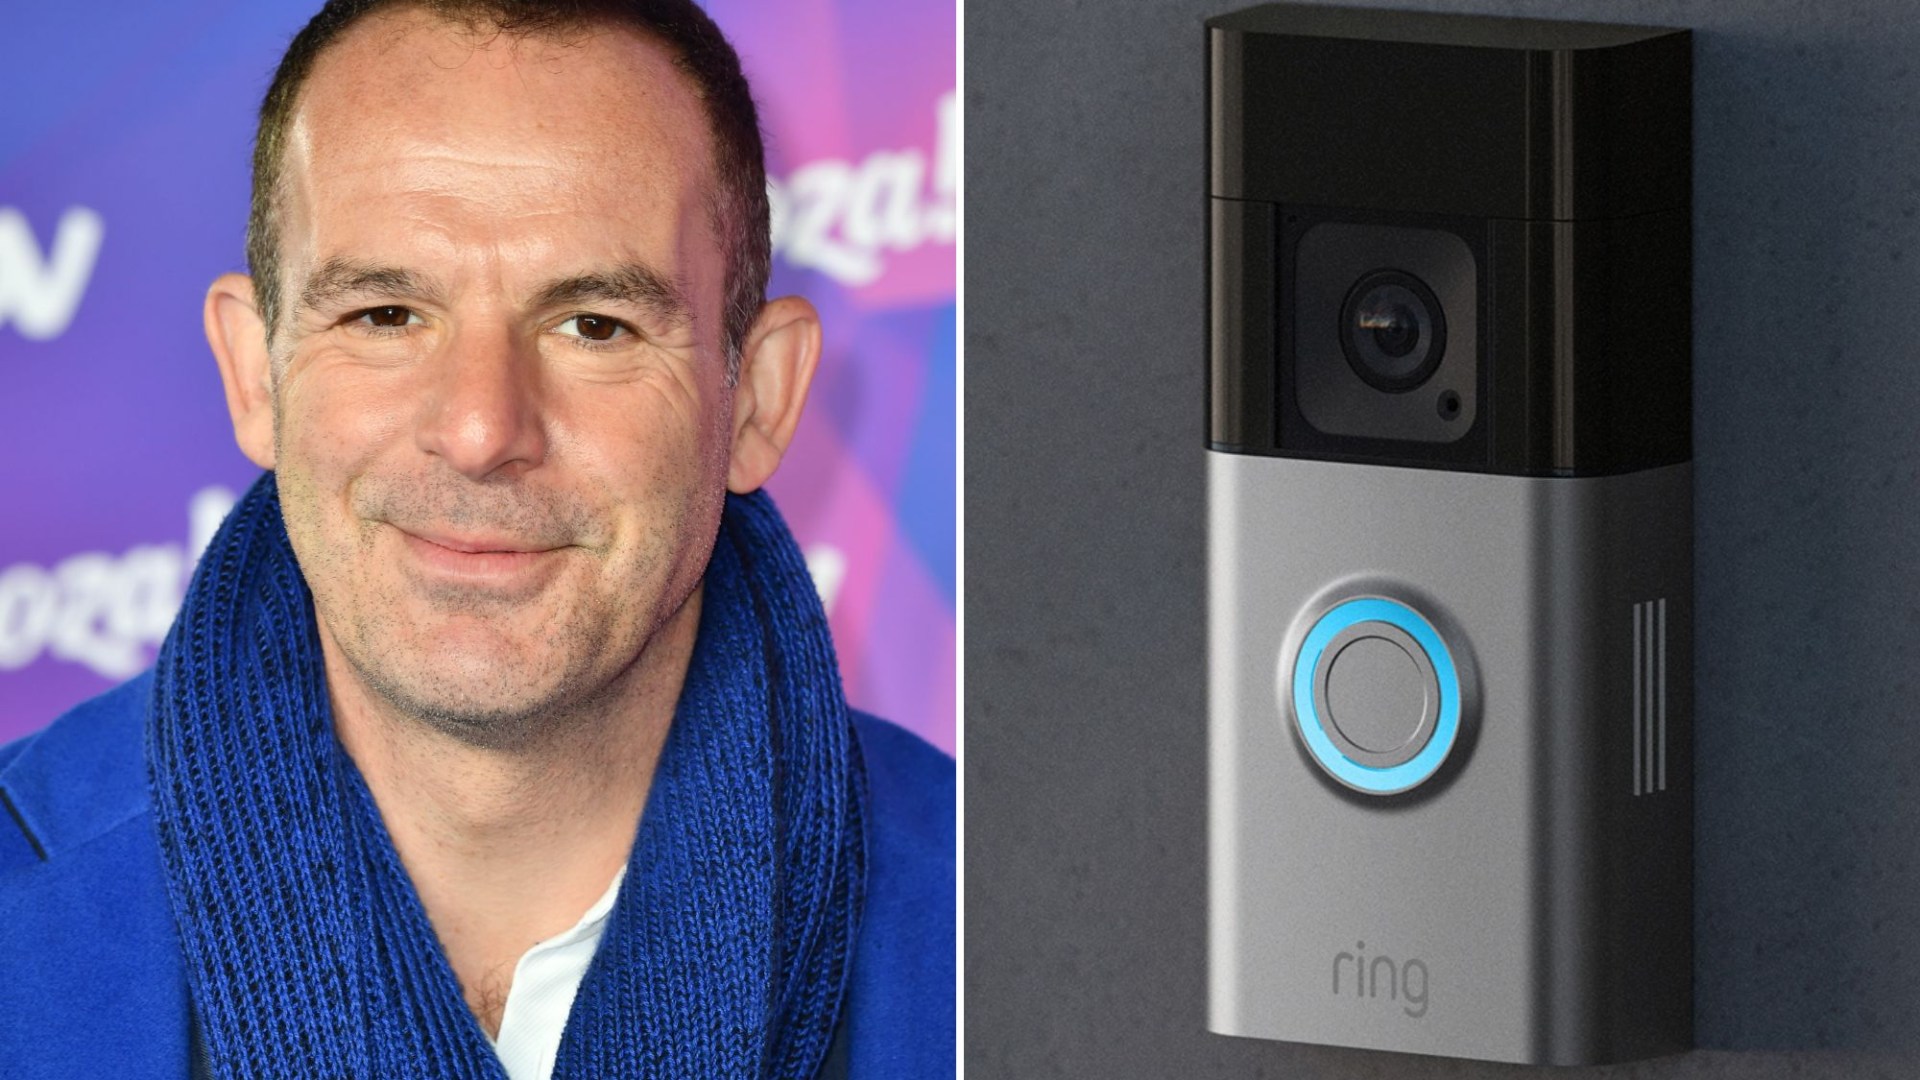 Save Big on Ring Doorbell With Martin Lewis’ Money-Saving Trick – Don’t Miss Out on the 43% Price Hike Solution!